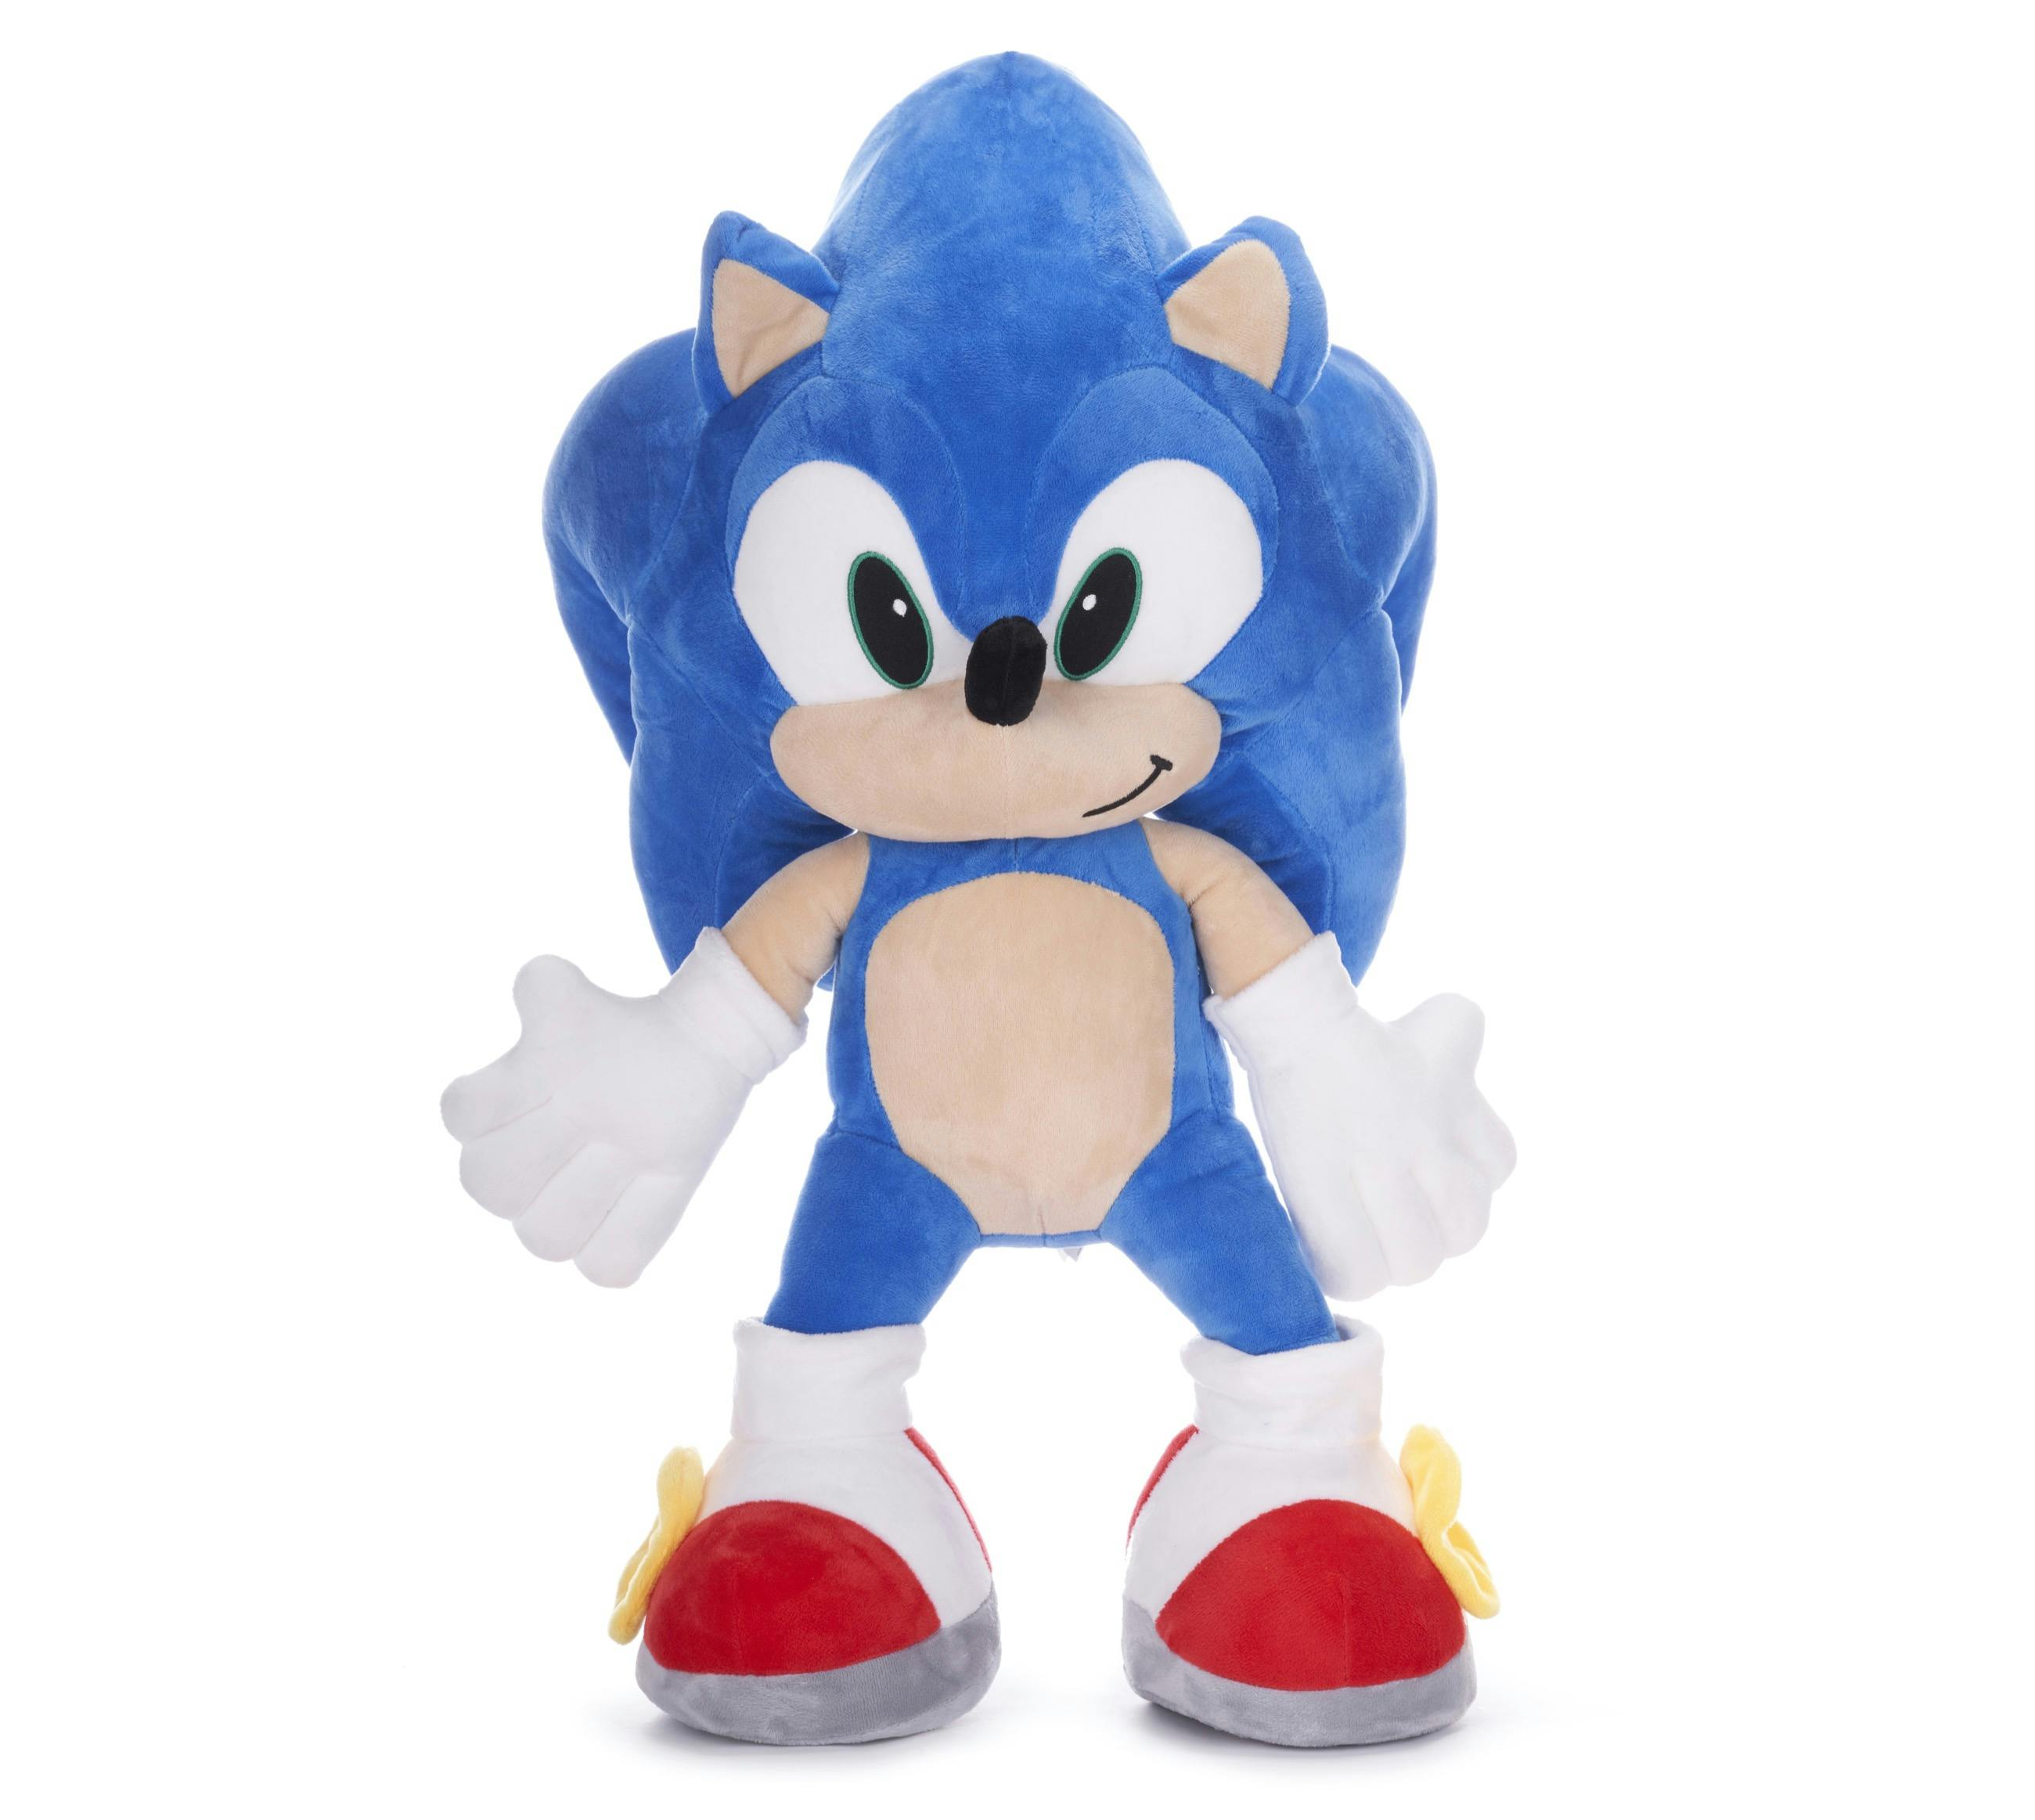 Product - Sonic the Hedgehog